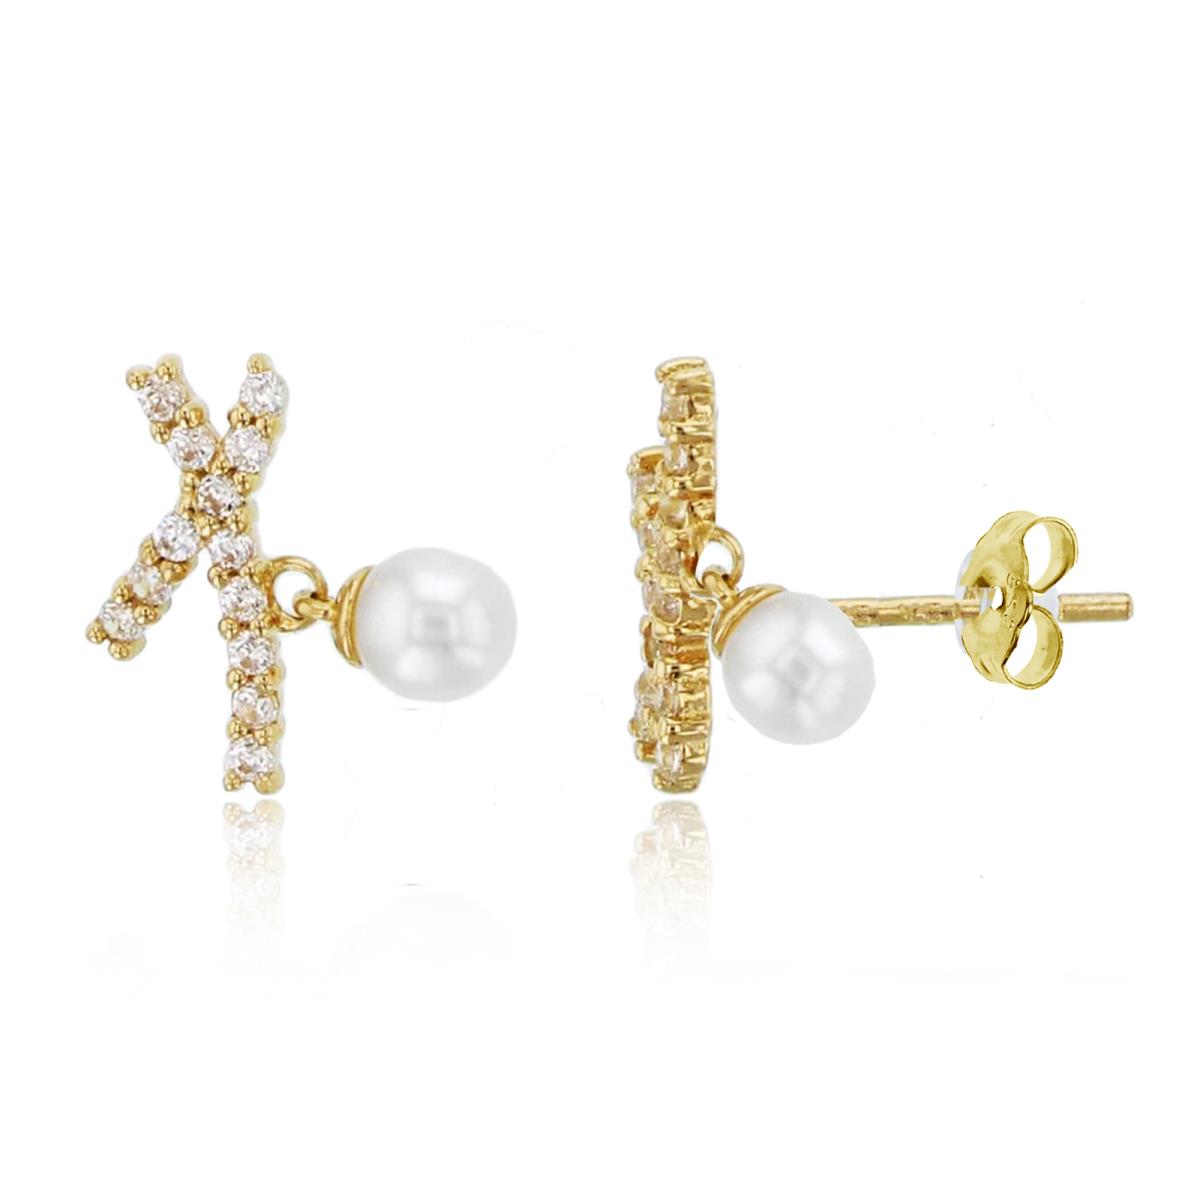 14K Yellow Gold Rnd CZ & Dangling Fresh Water Pearl Criss/Cross Studs with 4.5mm Clutch